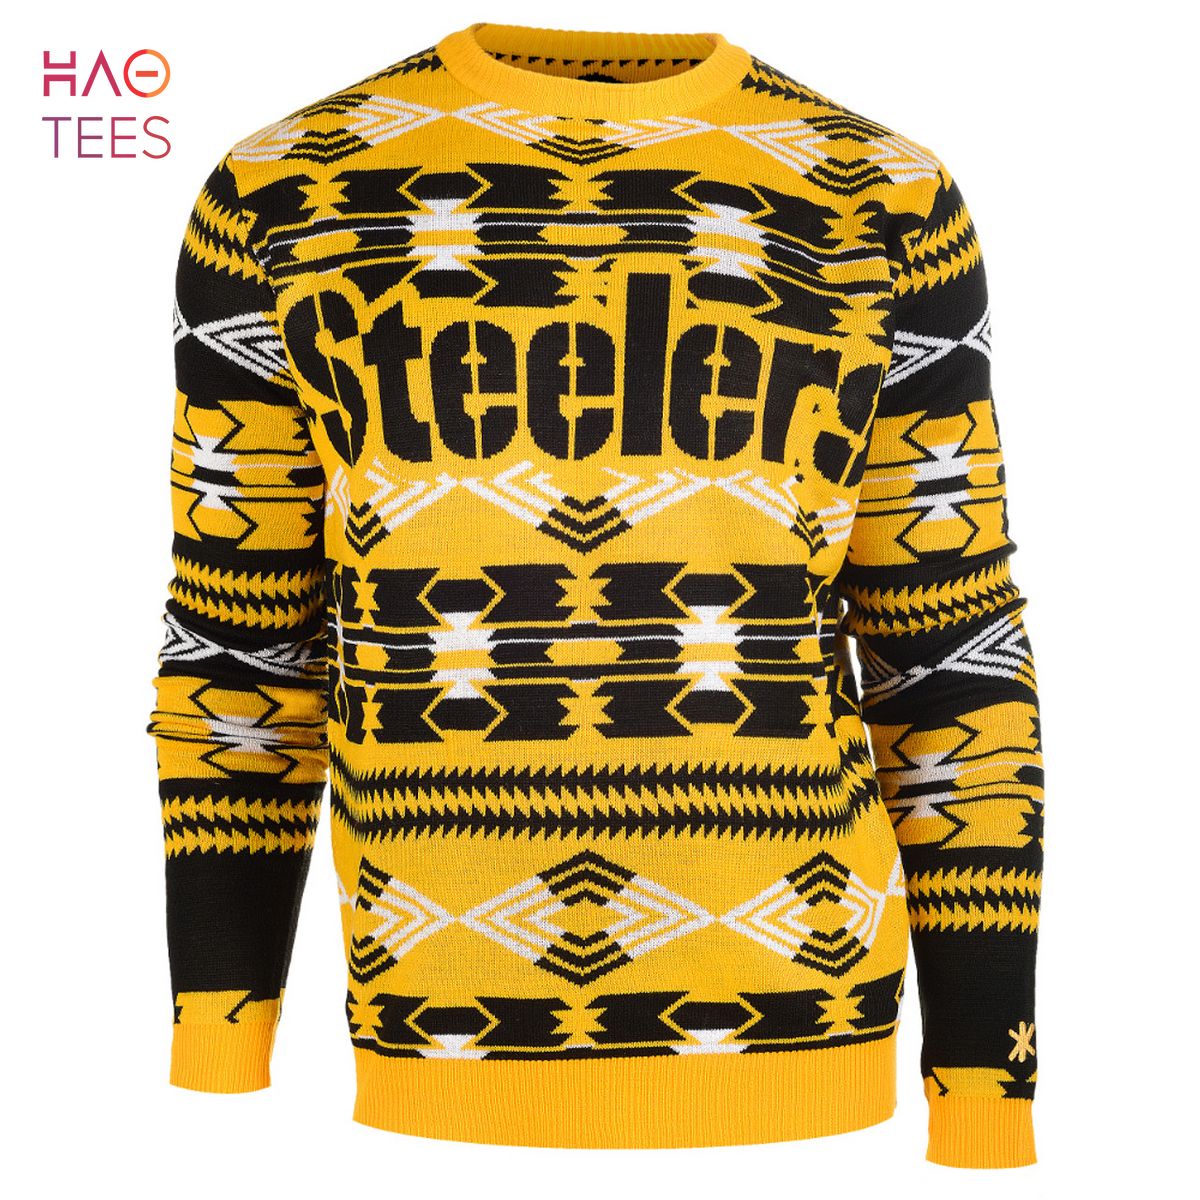 BEST Pittsburgh Steelers NFL Aztec Ugly Crew Neck Sweater